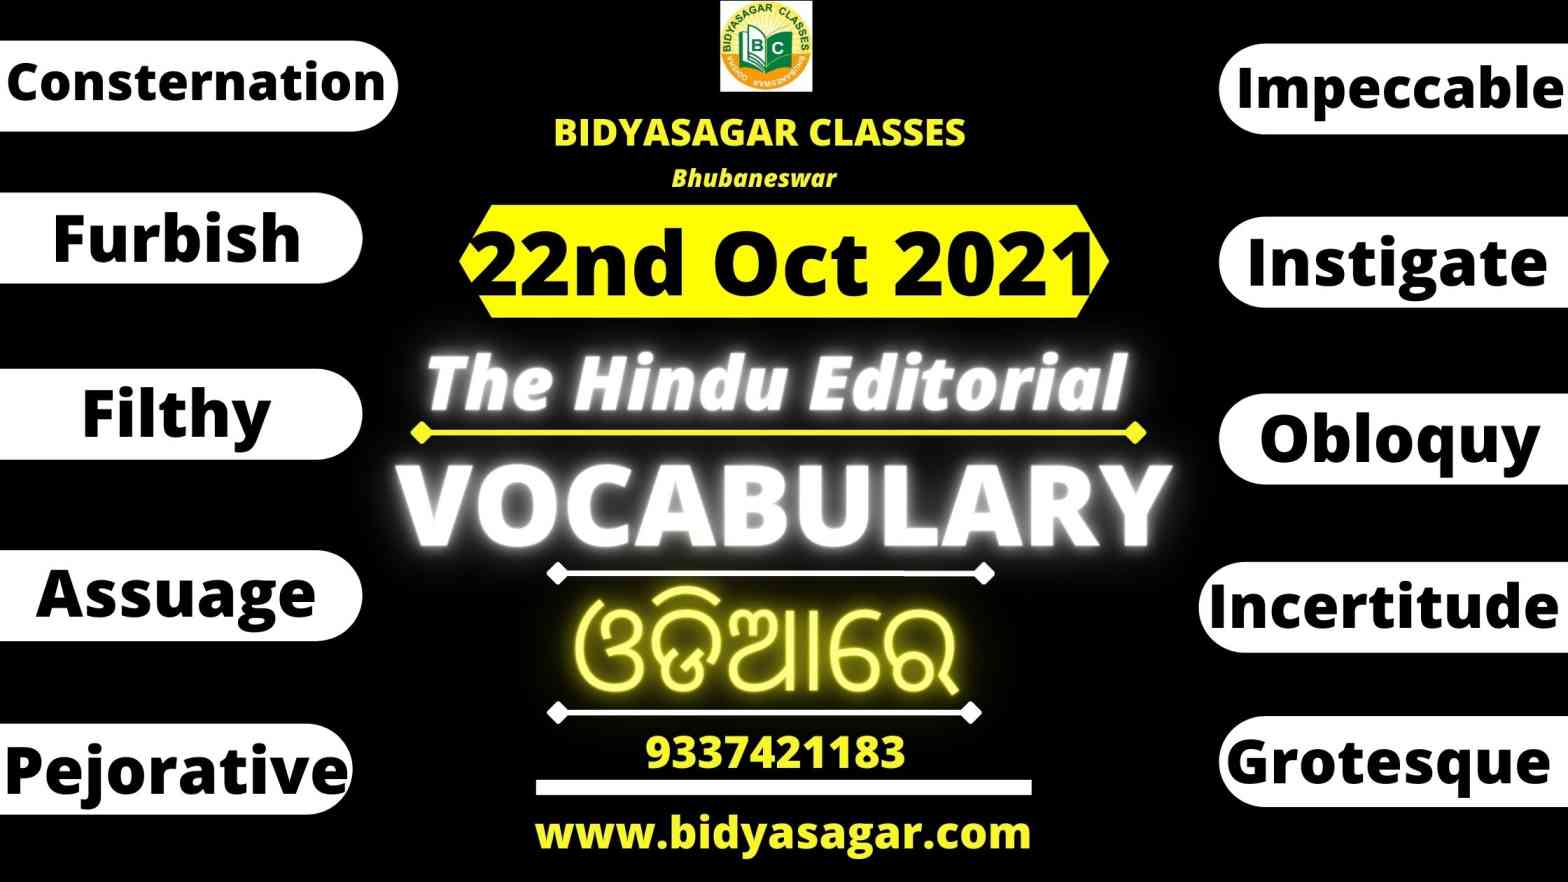 The Hindu Editorial Vocabulary of 22nd October 2021